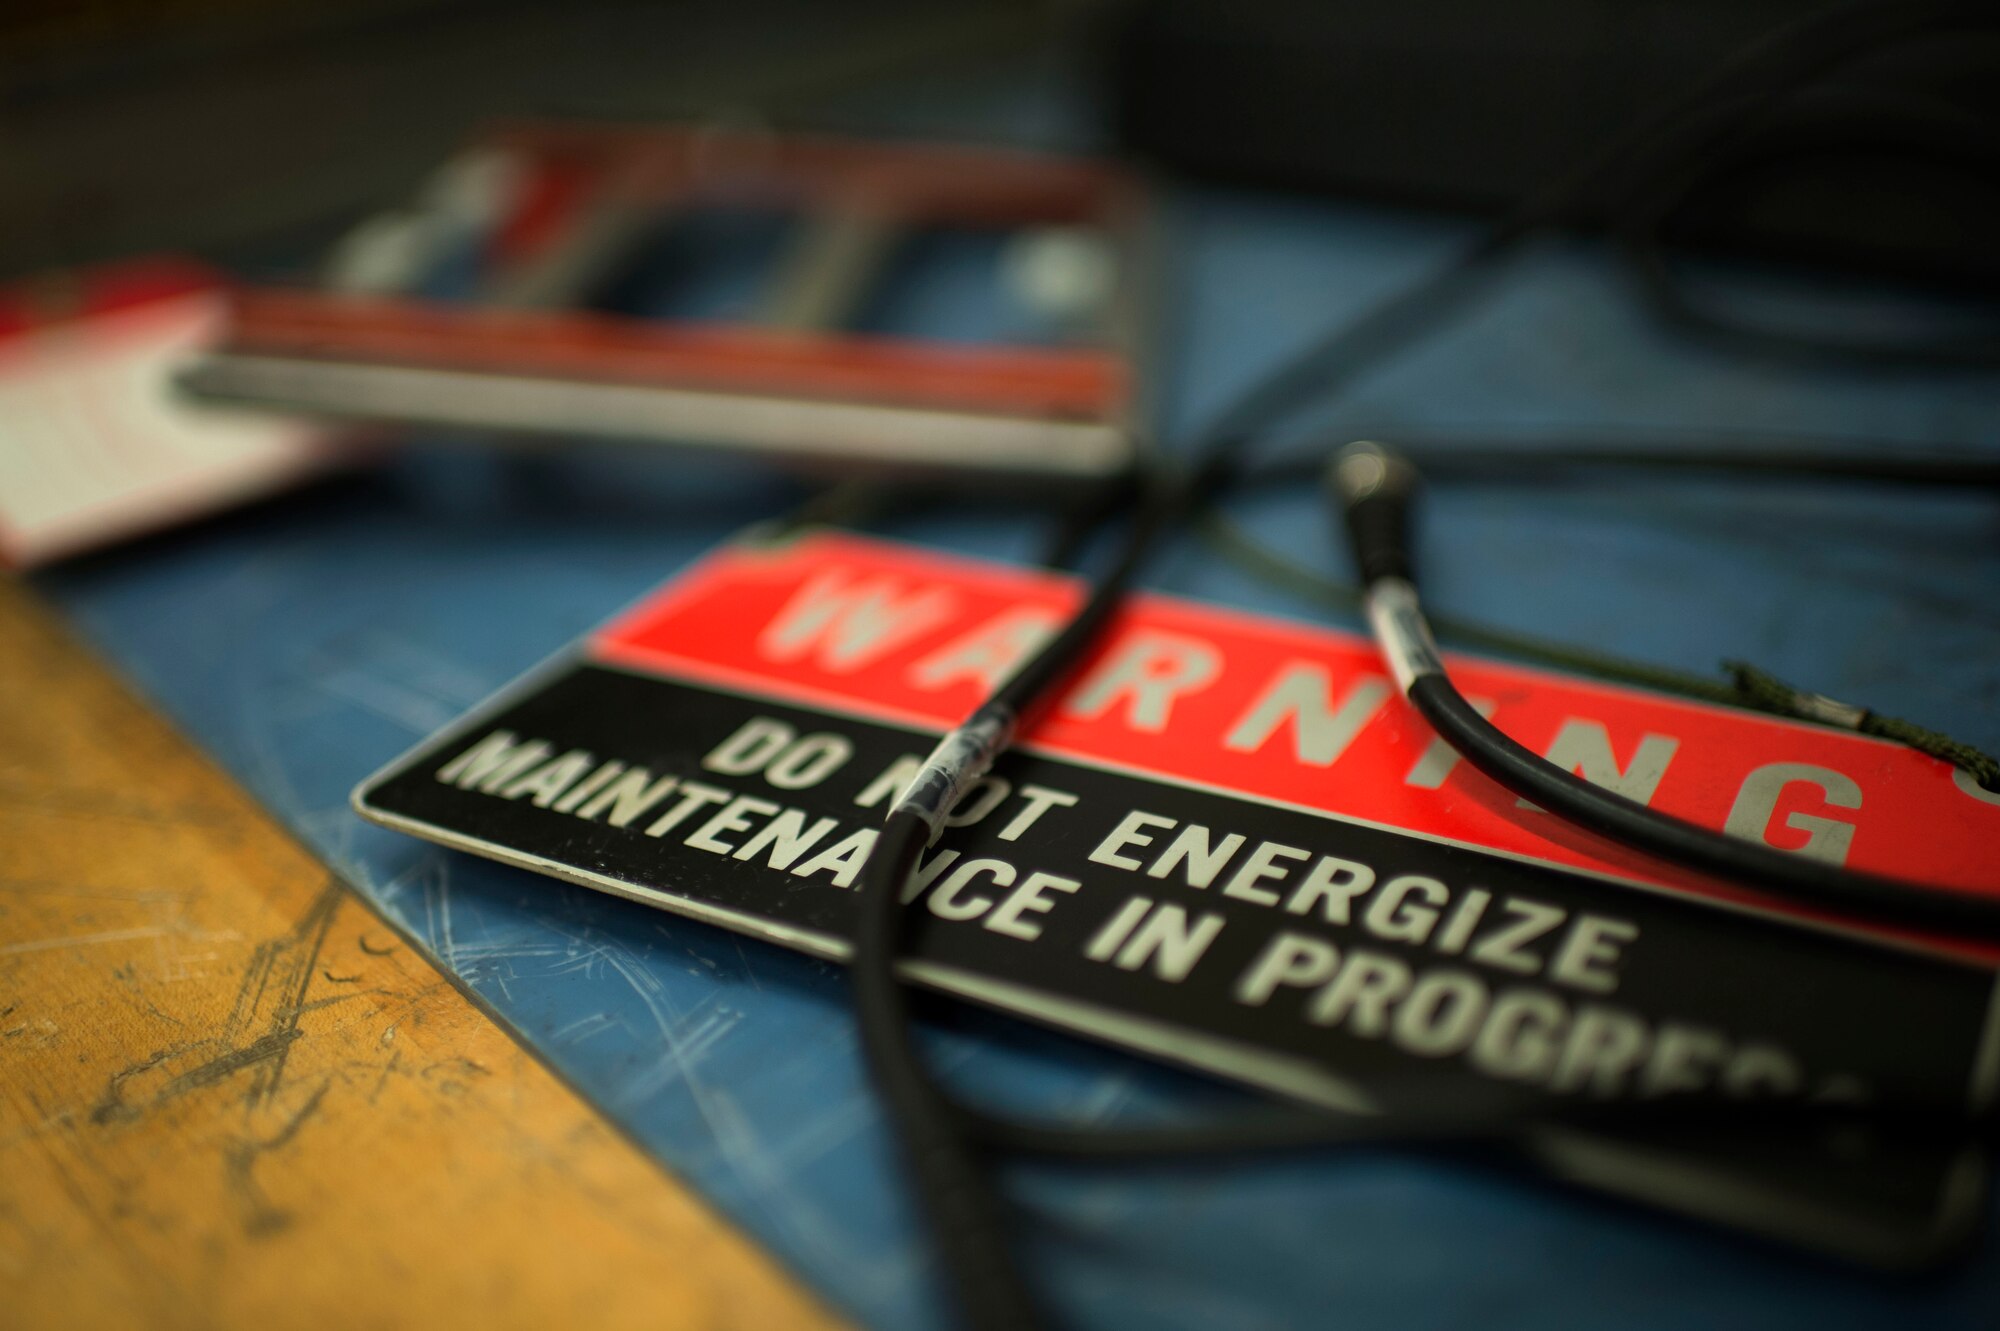 A warning sign rests on the workbench of a radio maintenance bay at Spangdahlem Air Base, Germany, June 30, 2014. Technicians must use proper personal protective gear while performing maintenance to ensure the safety of themselves and the equipment. (U.S. Air Force photo by Senior Airman Gustavo Castillo/Released)